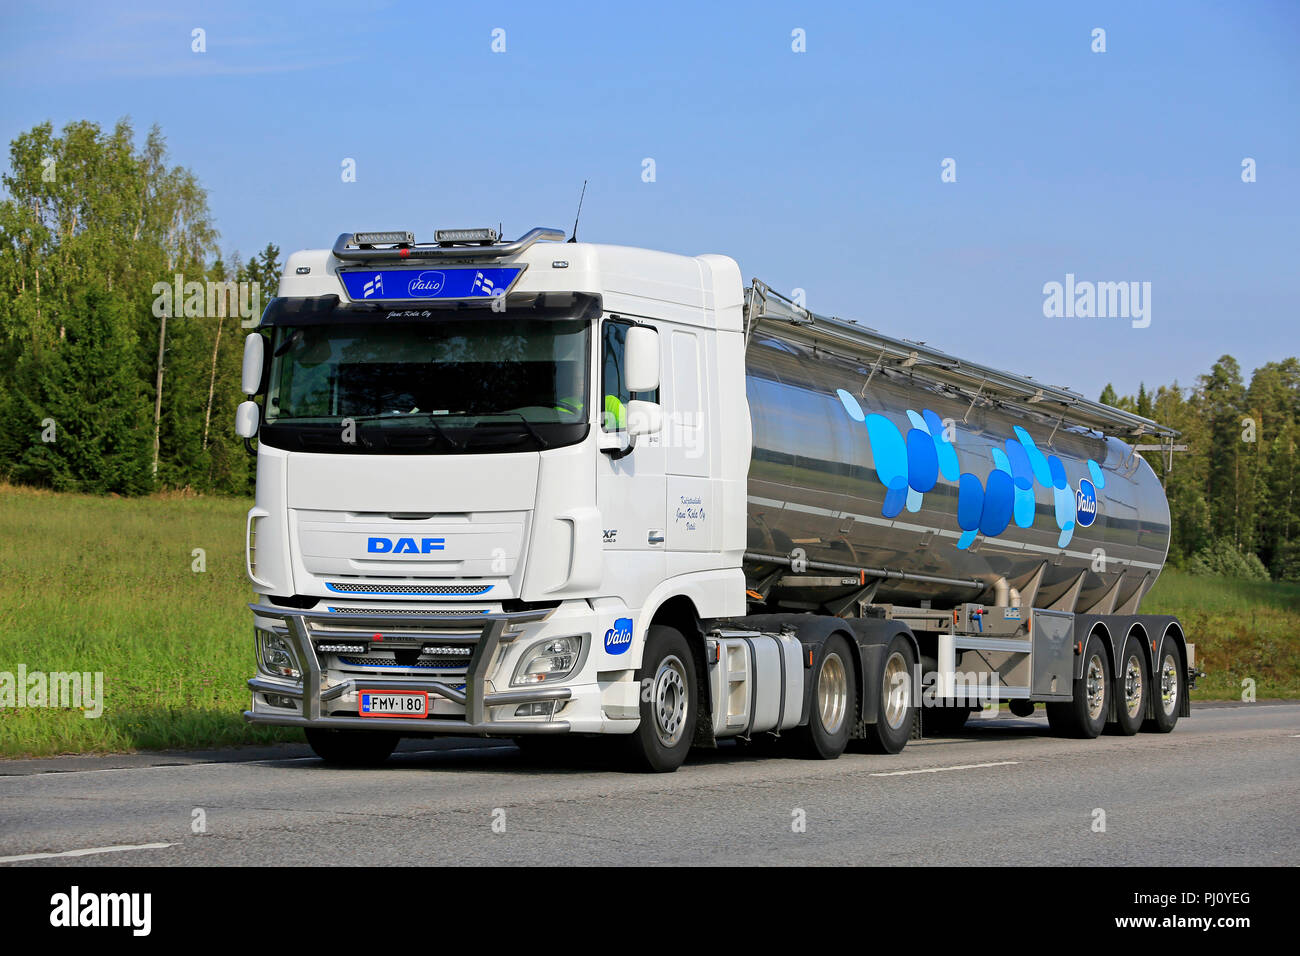 DAF XF510 semi tanker of Jani Kola Oy delivers Valio milk in Uurainen, Finland - August 24, 2018. Milk semi tankers are not an usual sight in Finland. Stock Photo